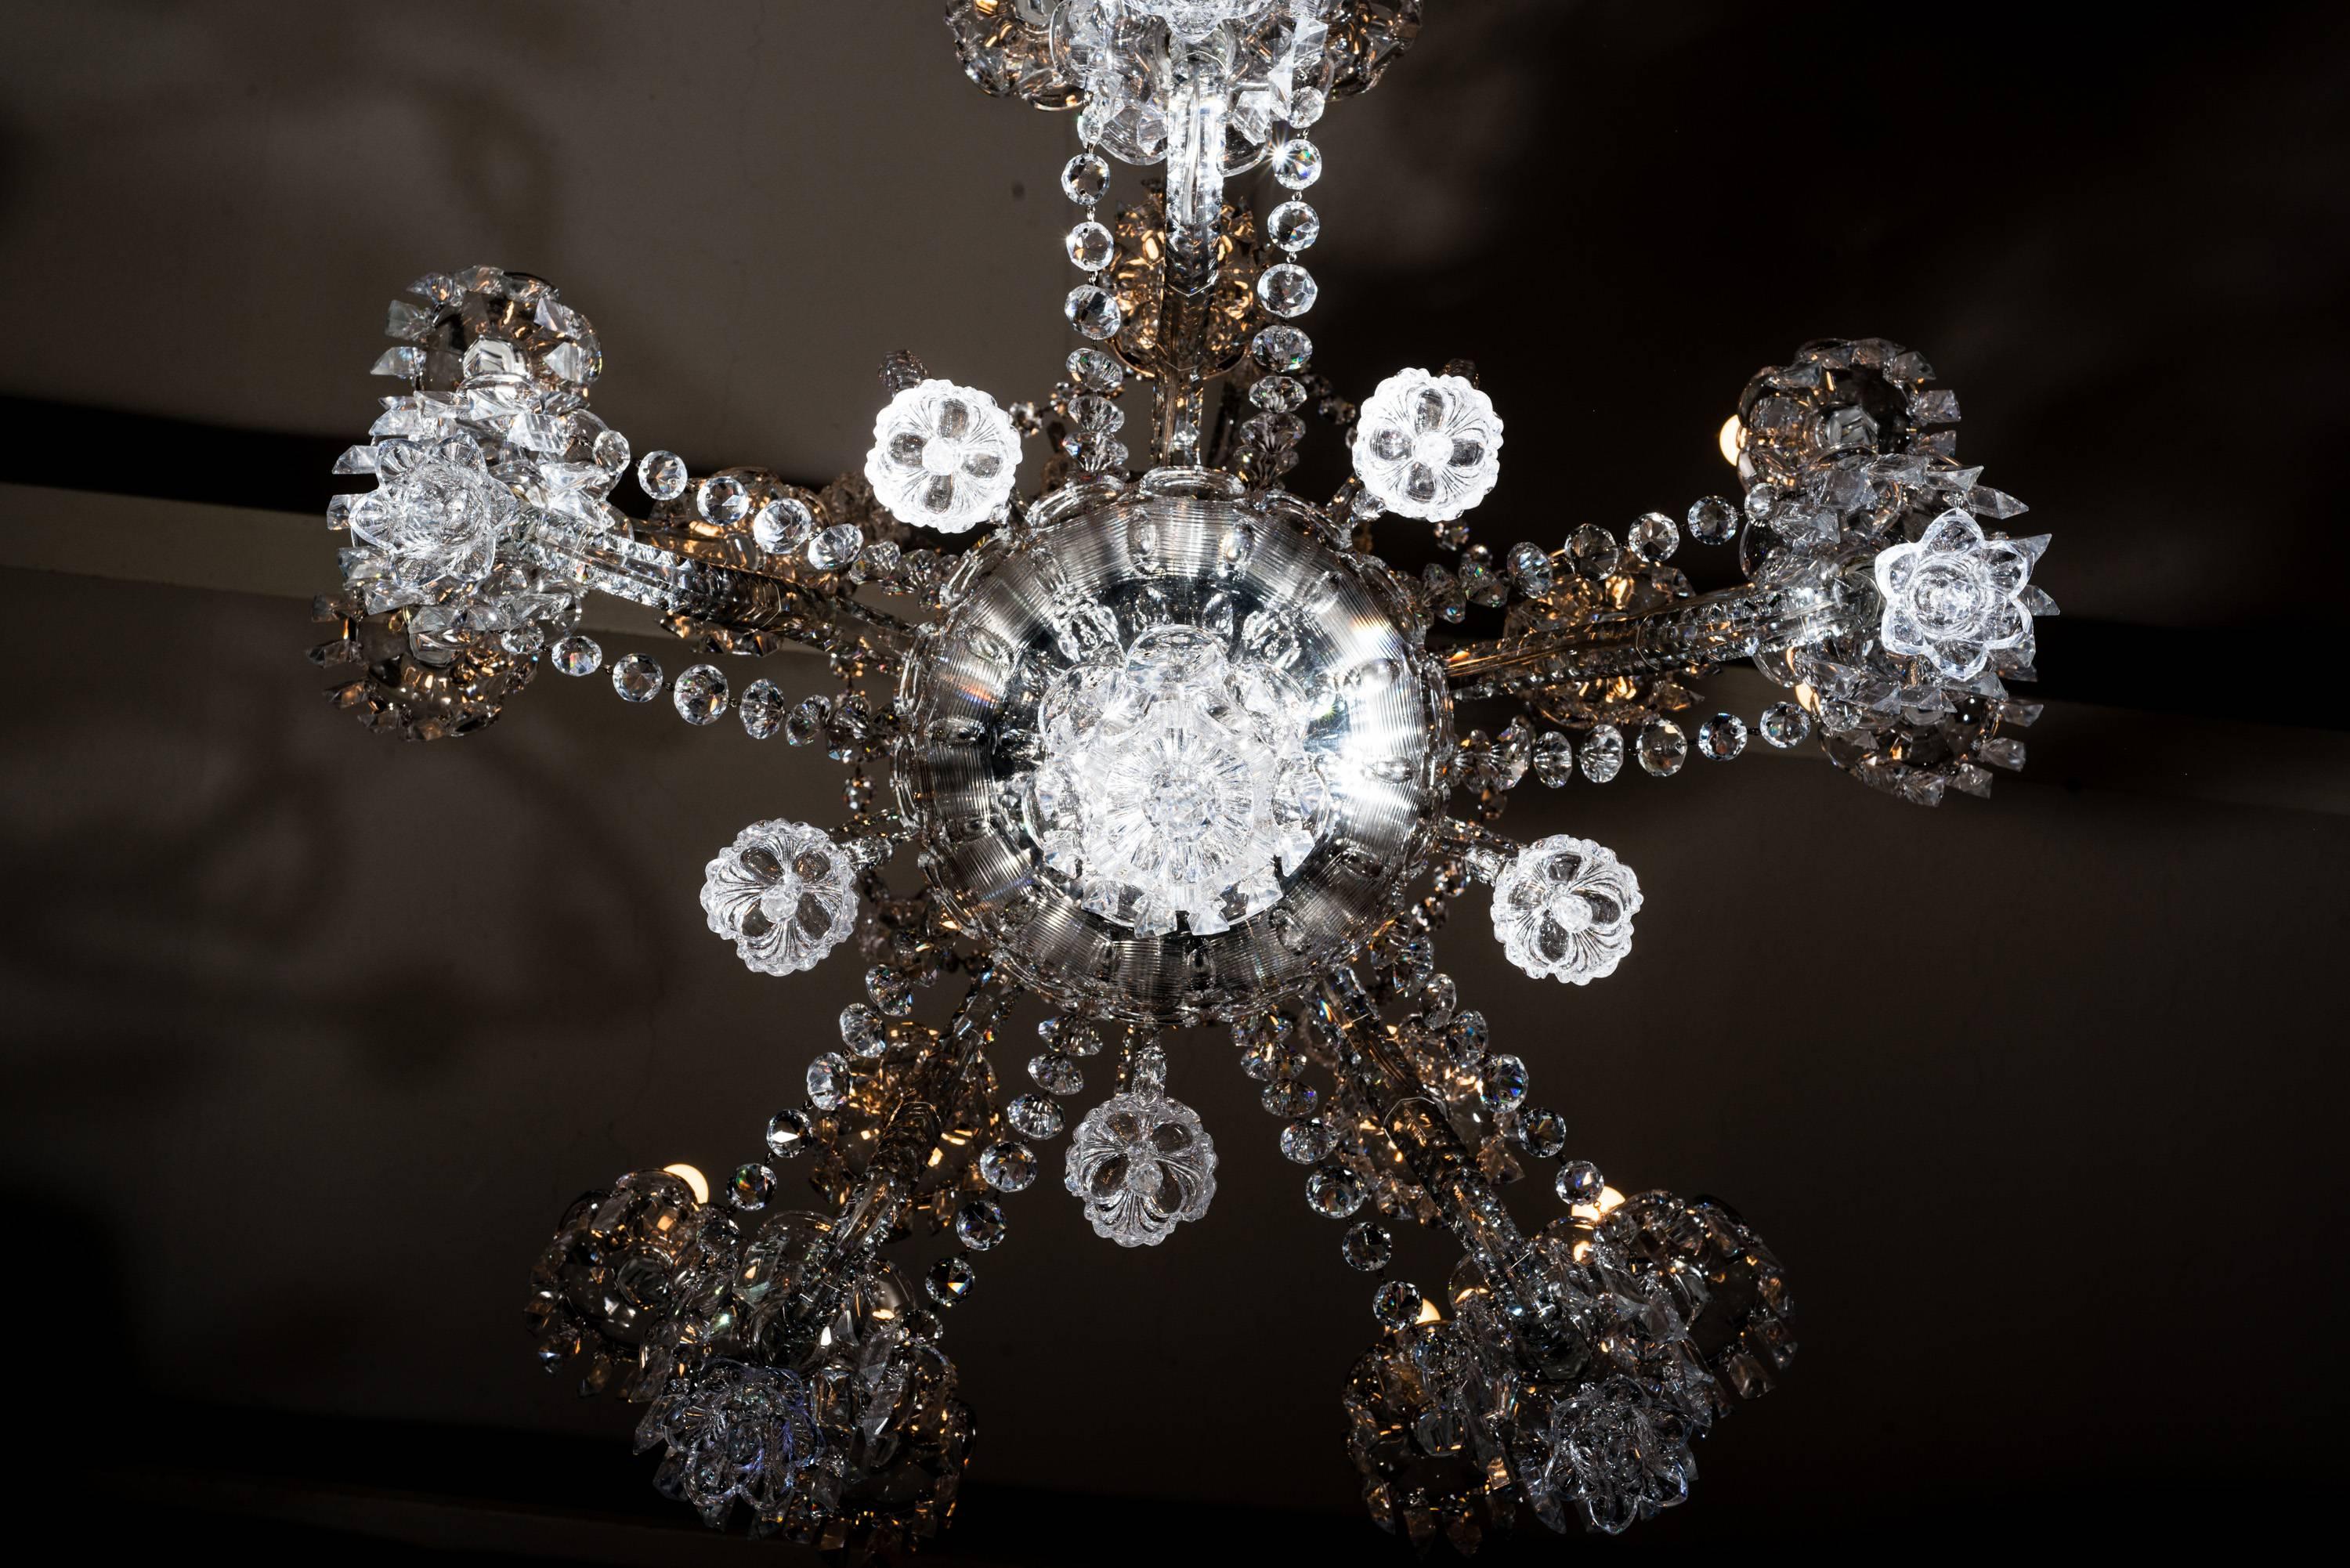 Baccarat Crystal Exceptional Chandelier, France, Early 19th Century For Sale 2